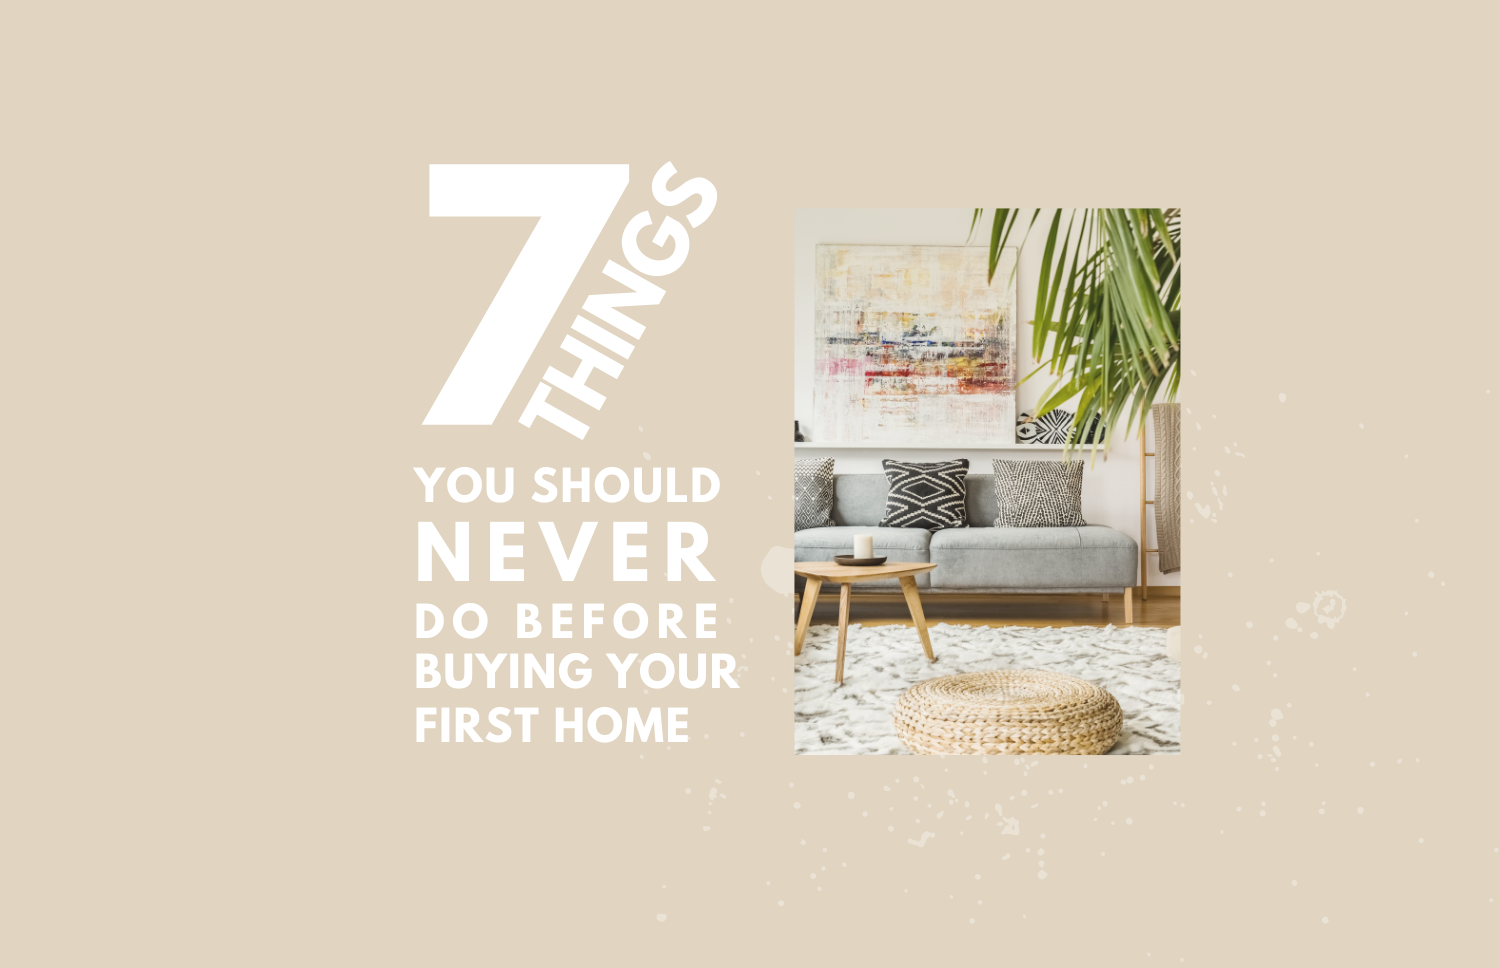 What Never To Do Before Buying a Home